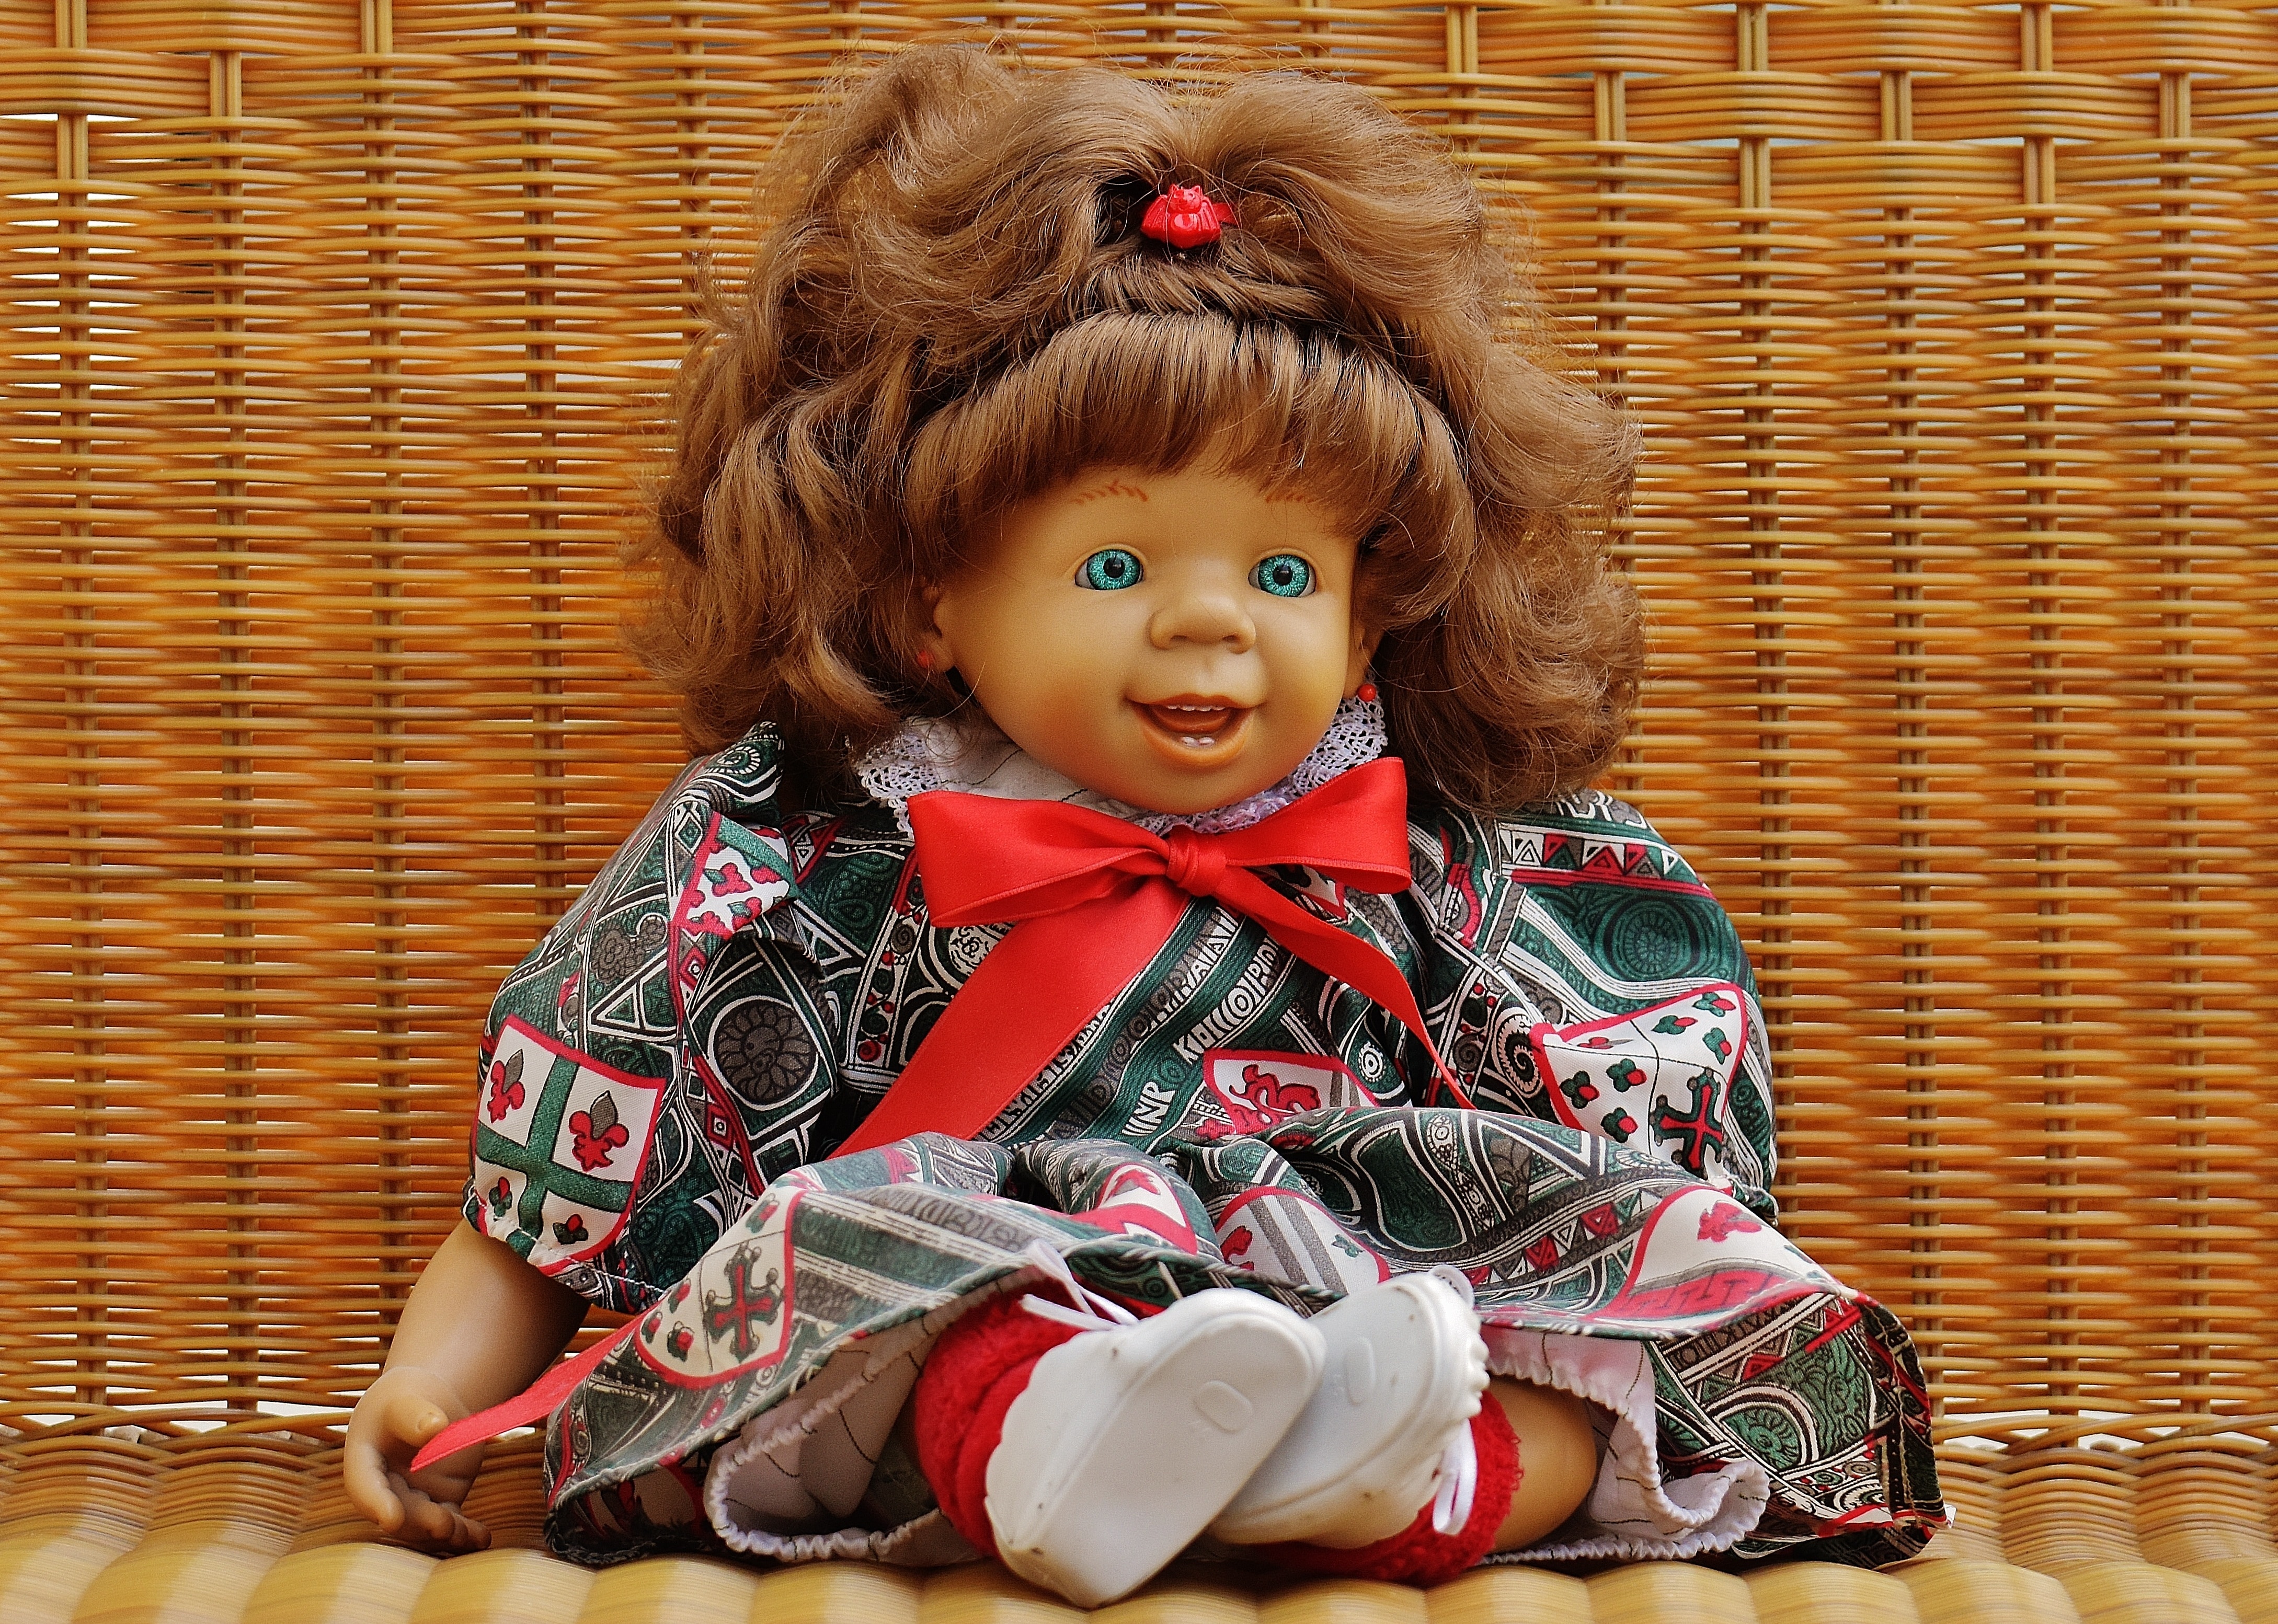 baby porcelain doll in red and green bow dress